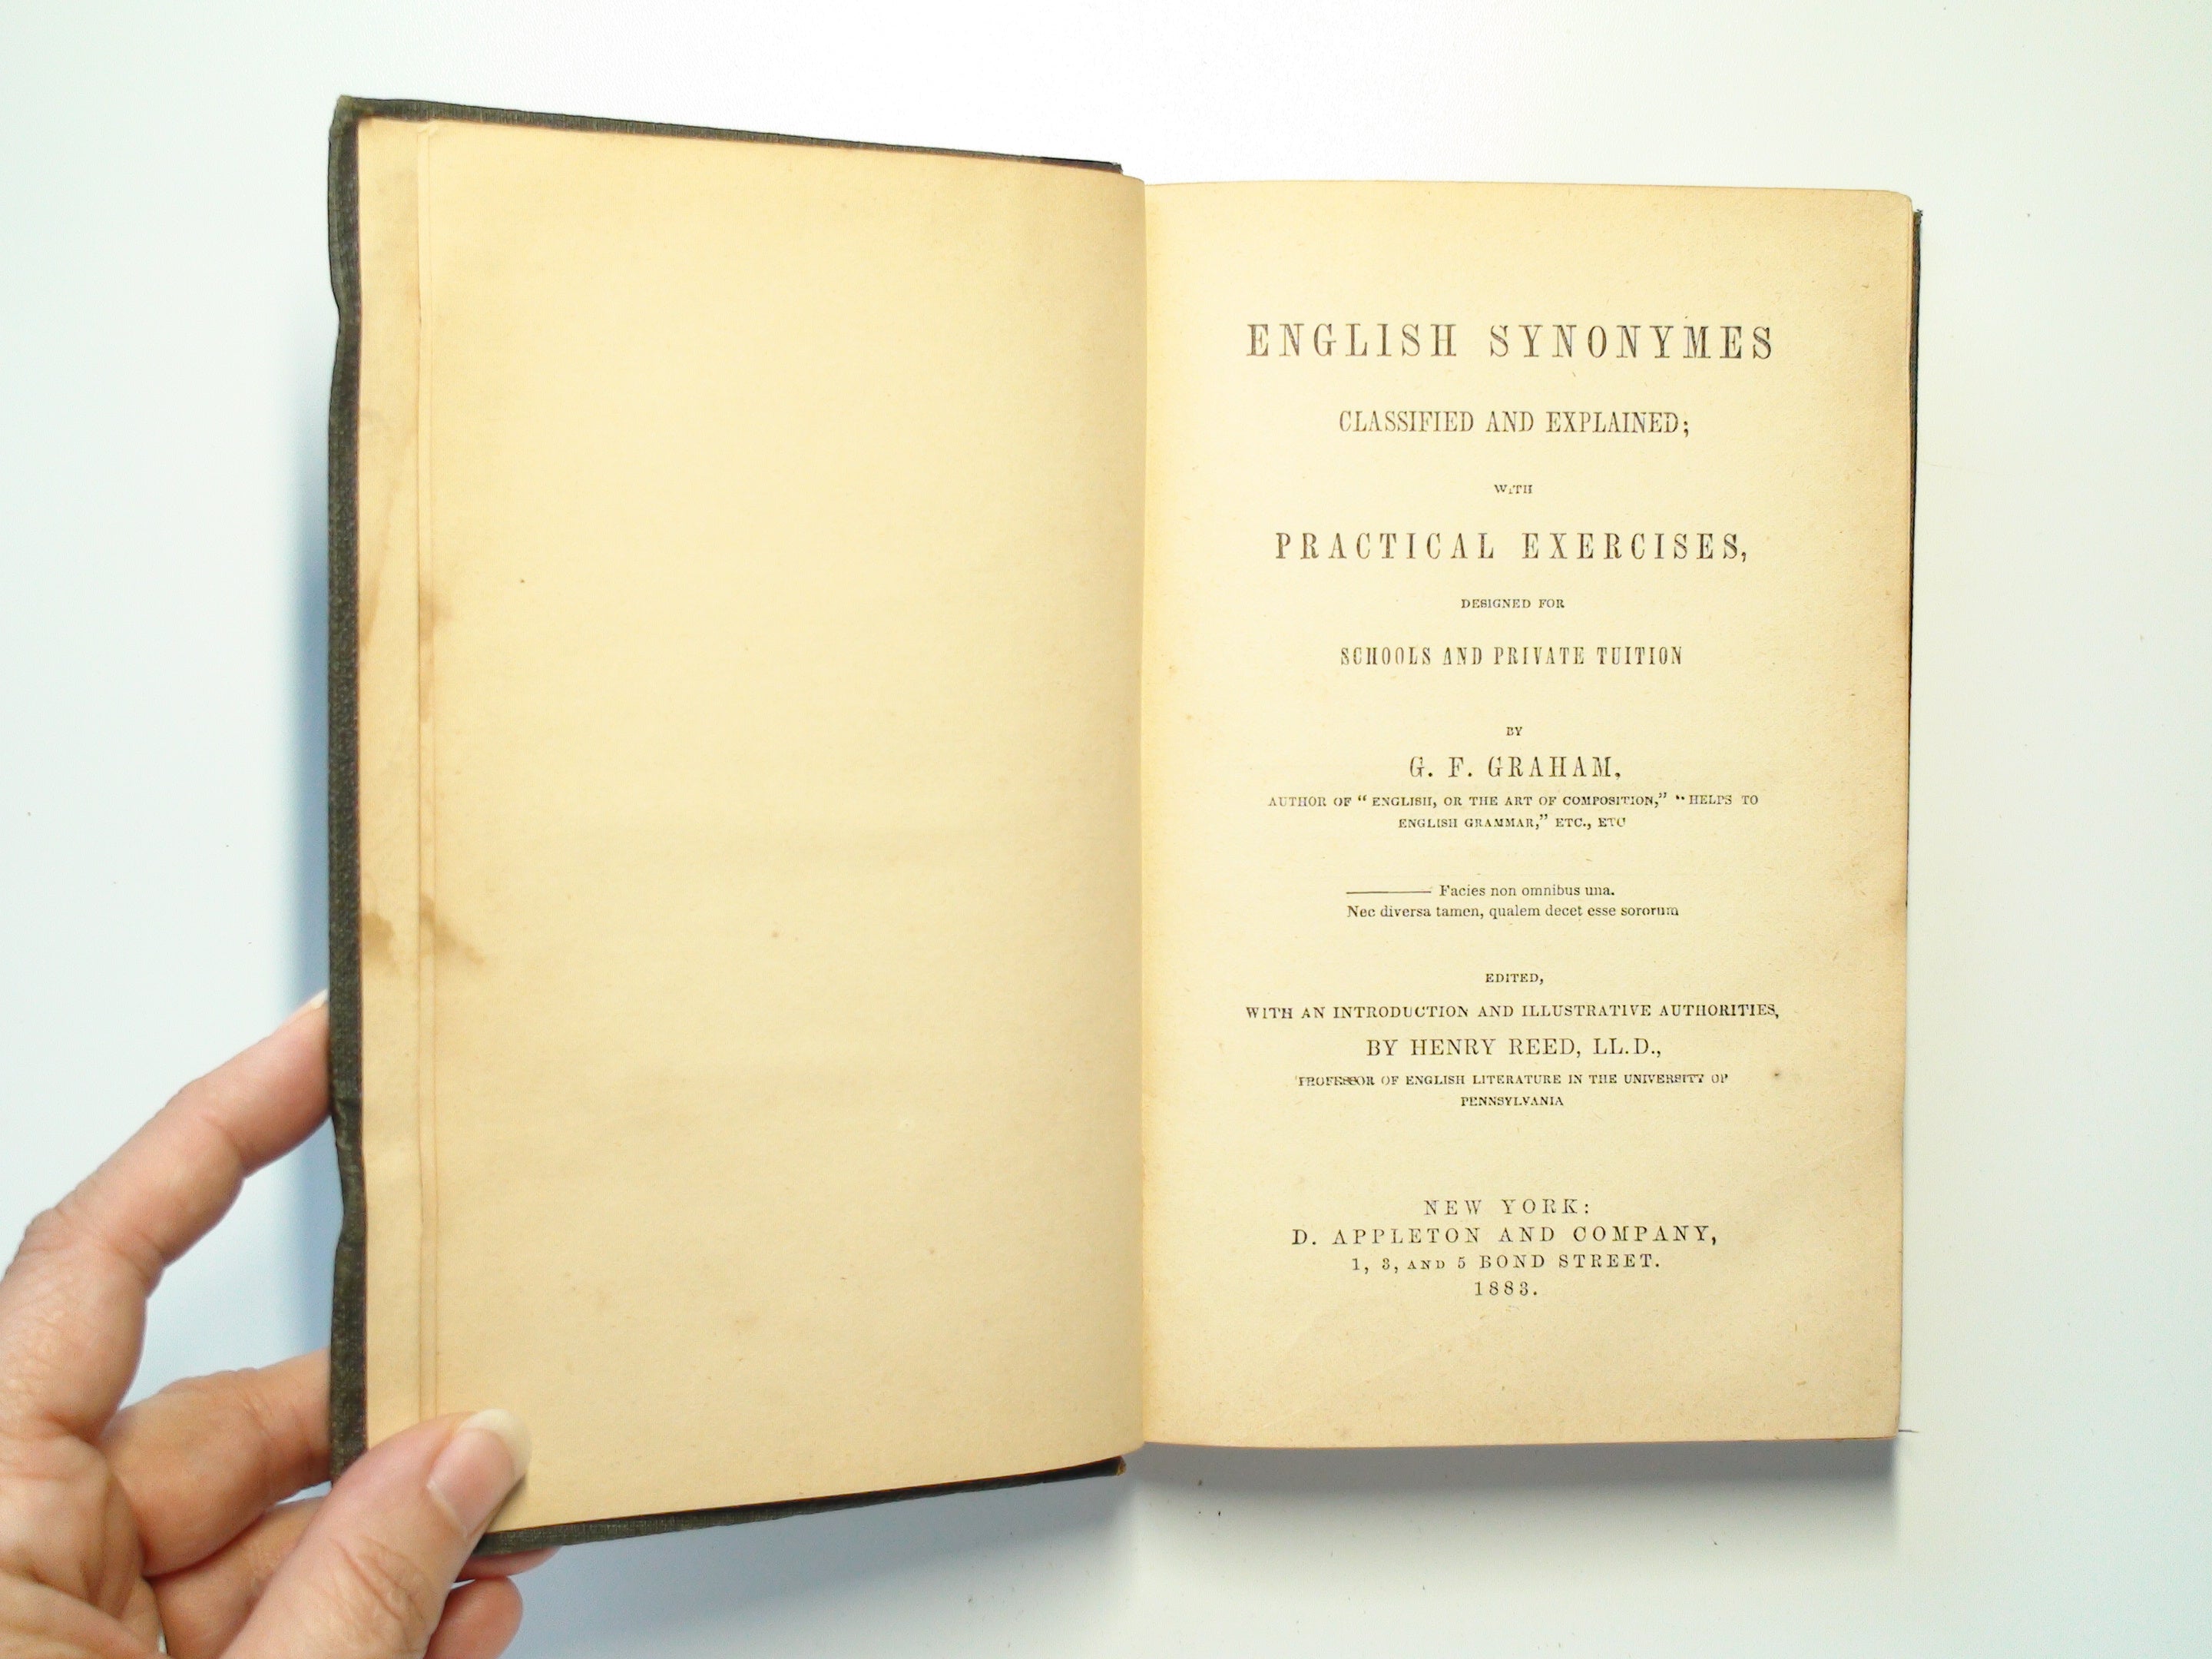 English Synonymes Classified and Explained, by G. F. Graham, 1883